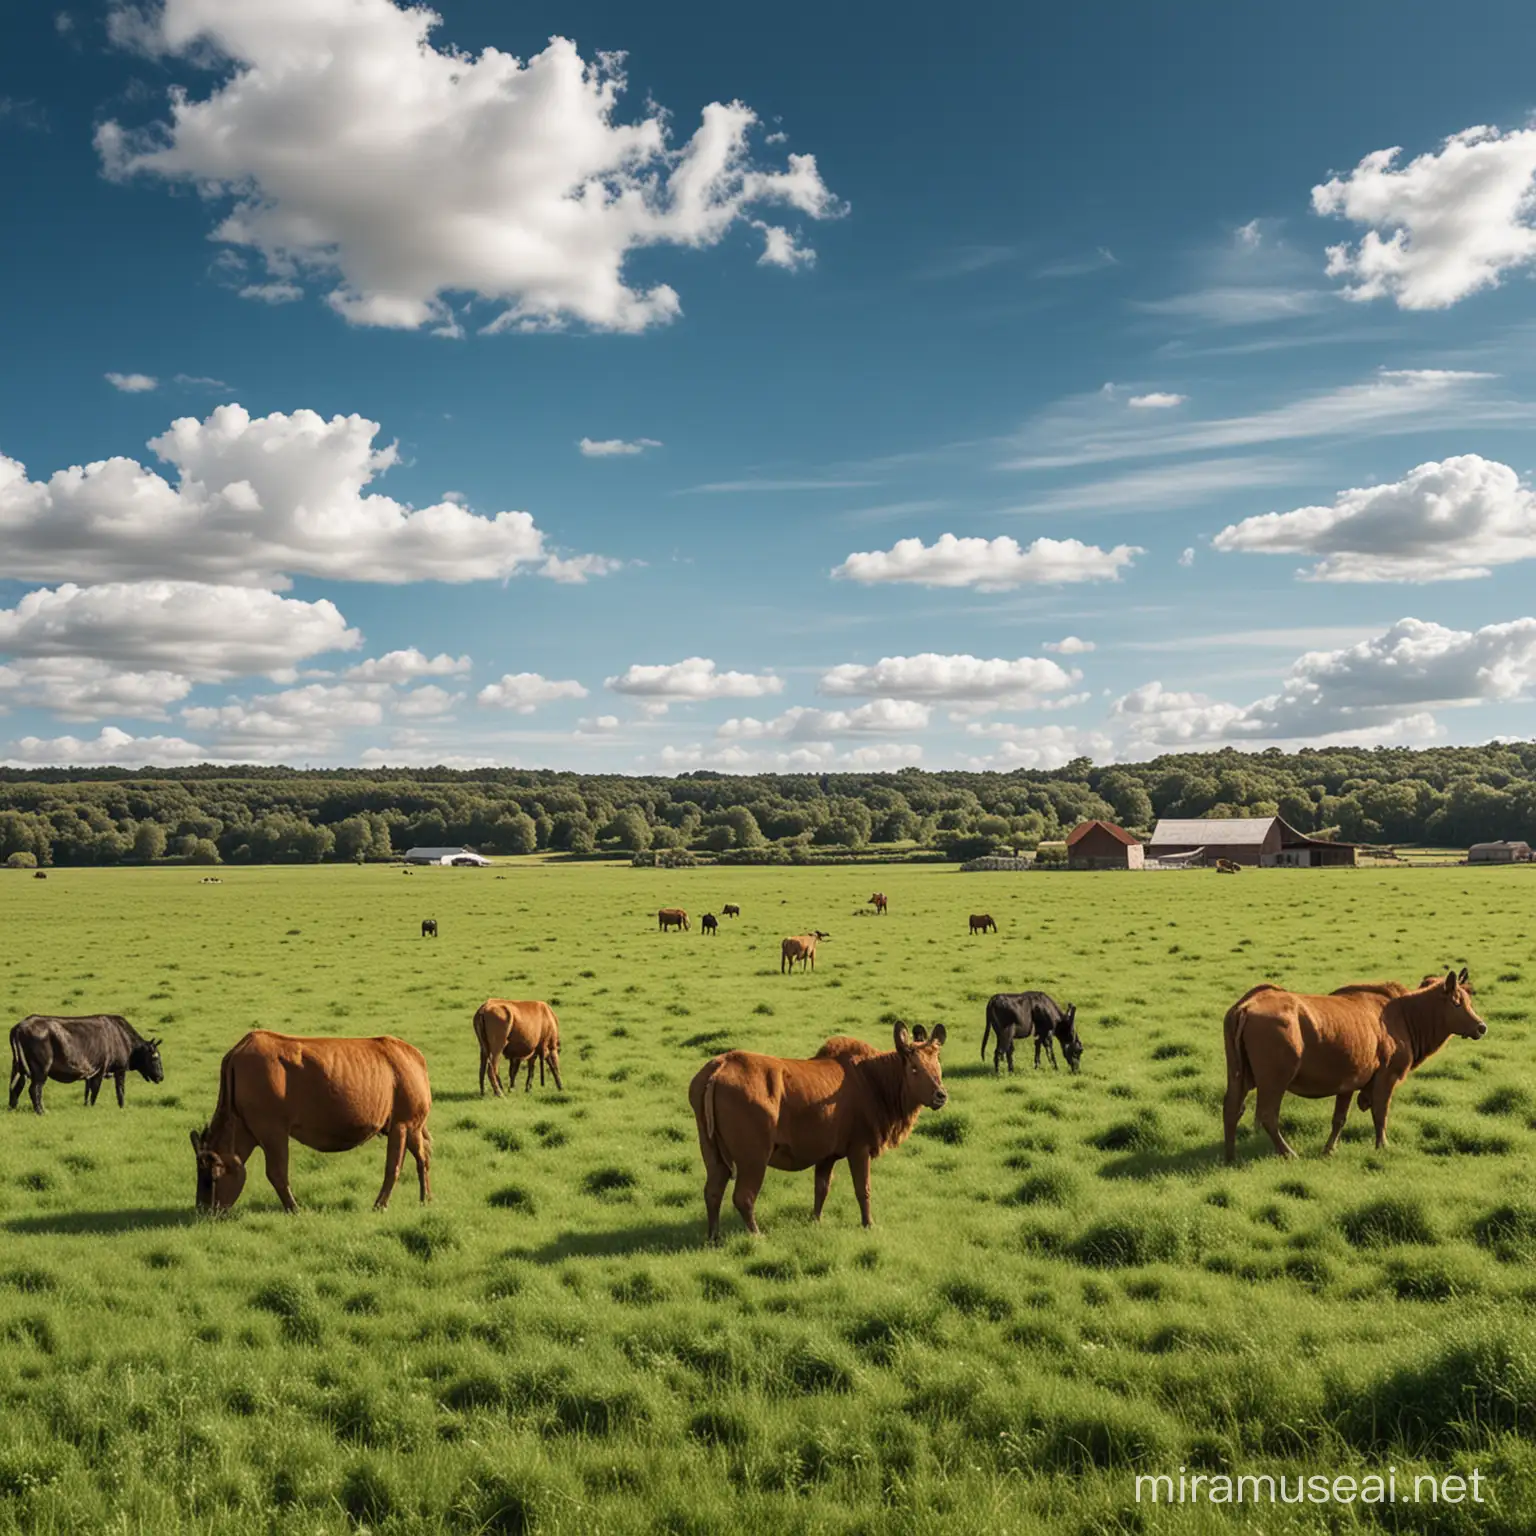 farm field with wild animals and blue sky

